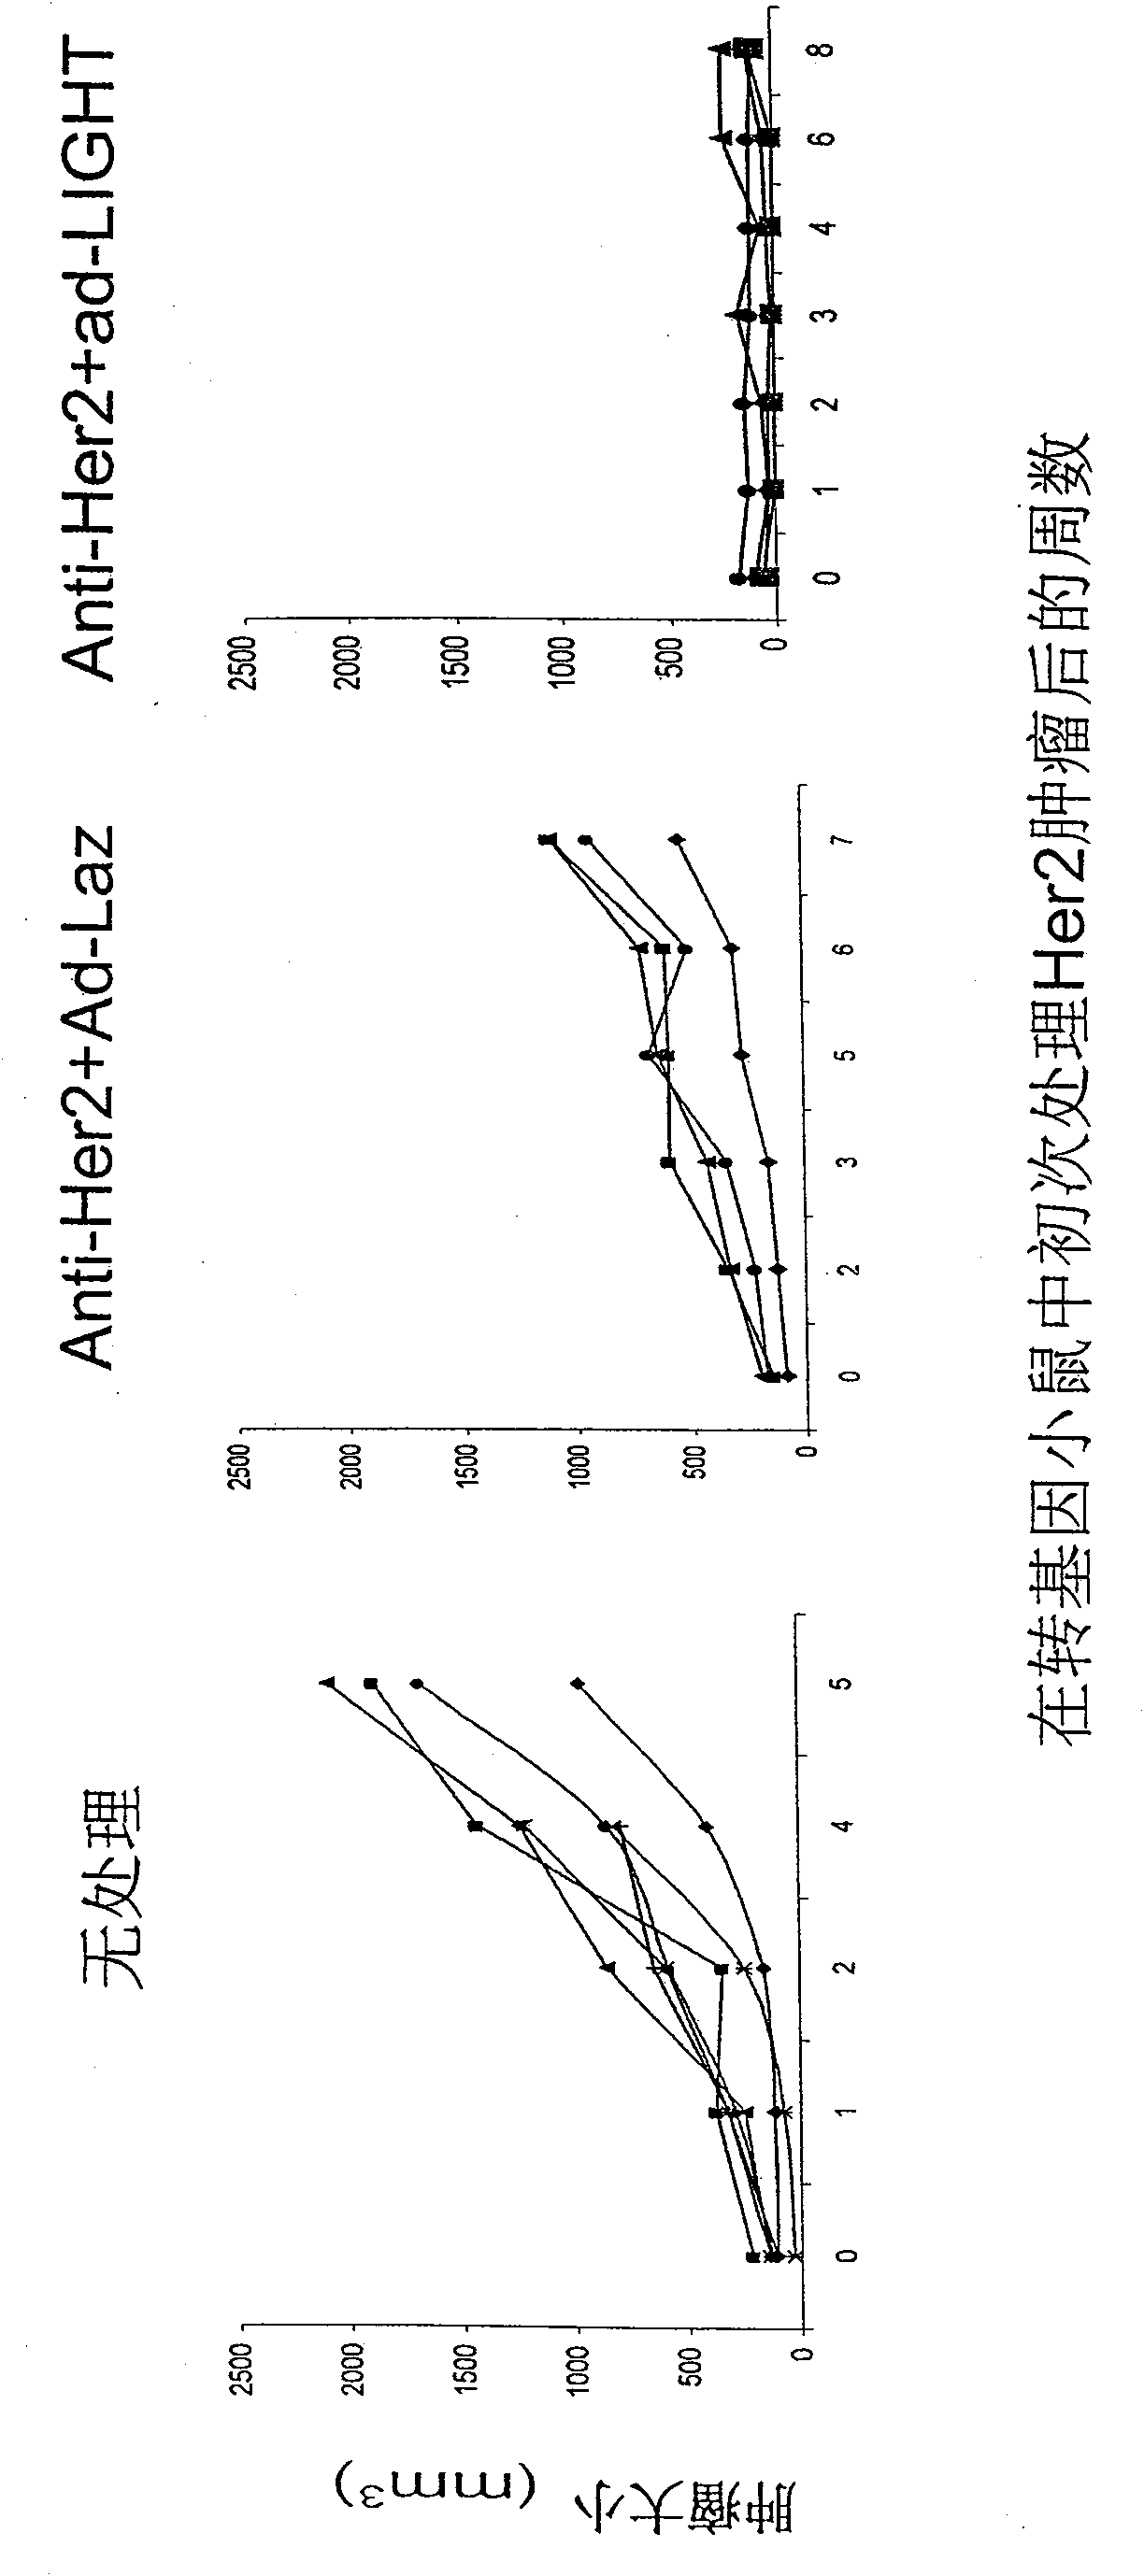 LIGHT-antitumor-antigen antibody for preventing and treating primary and metastatic cancer